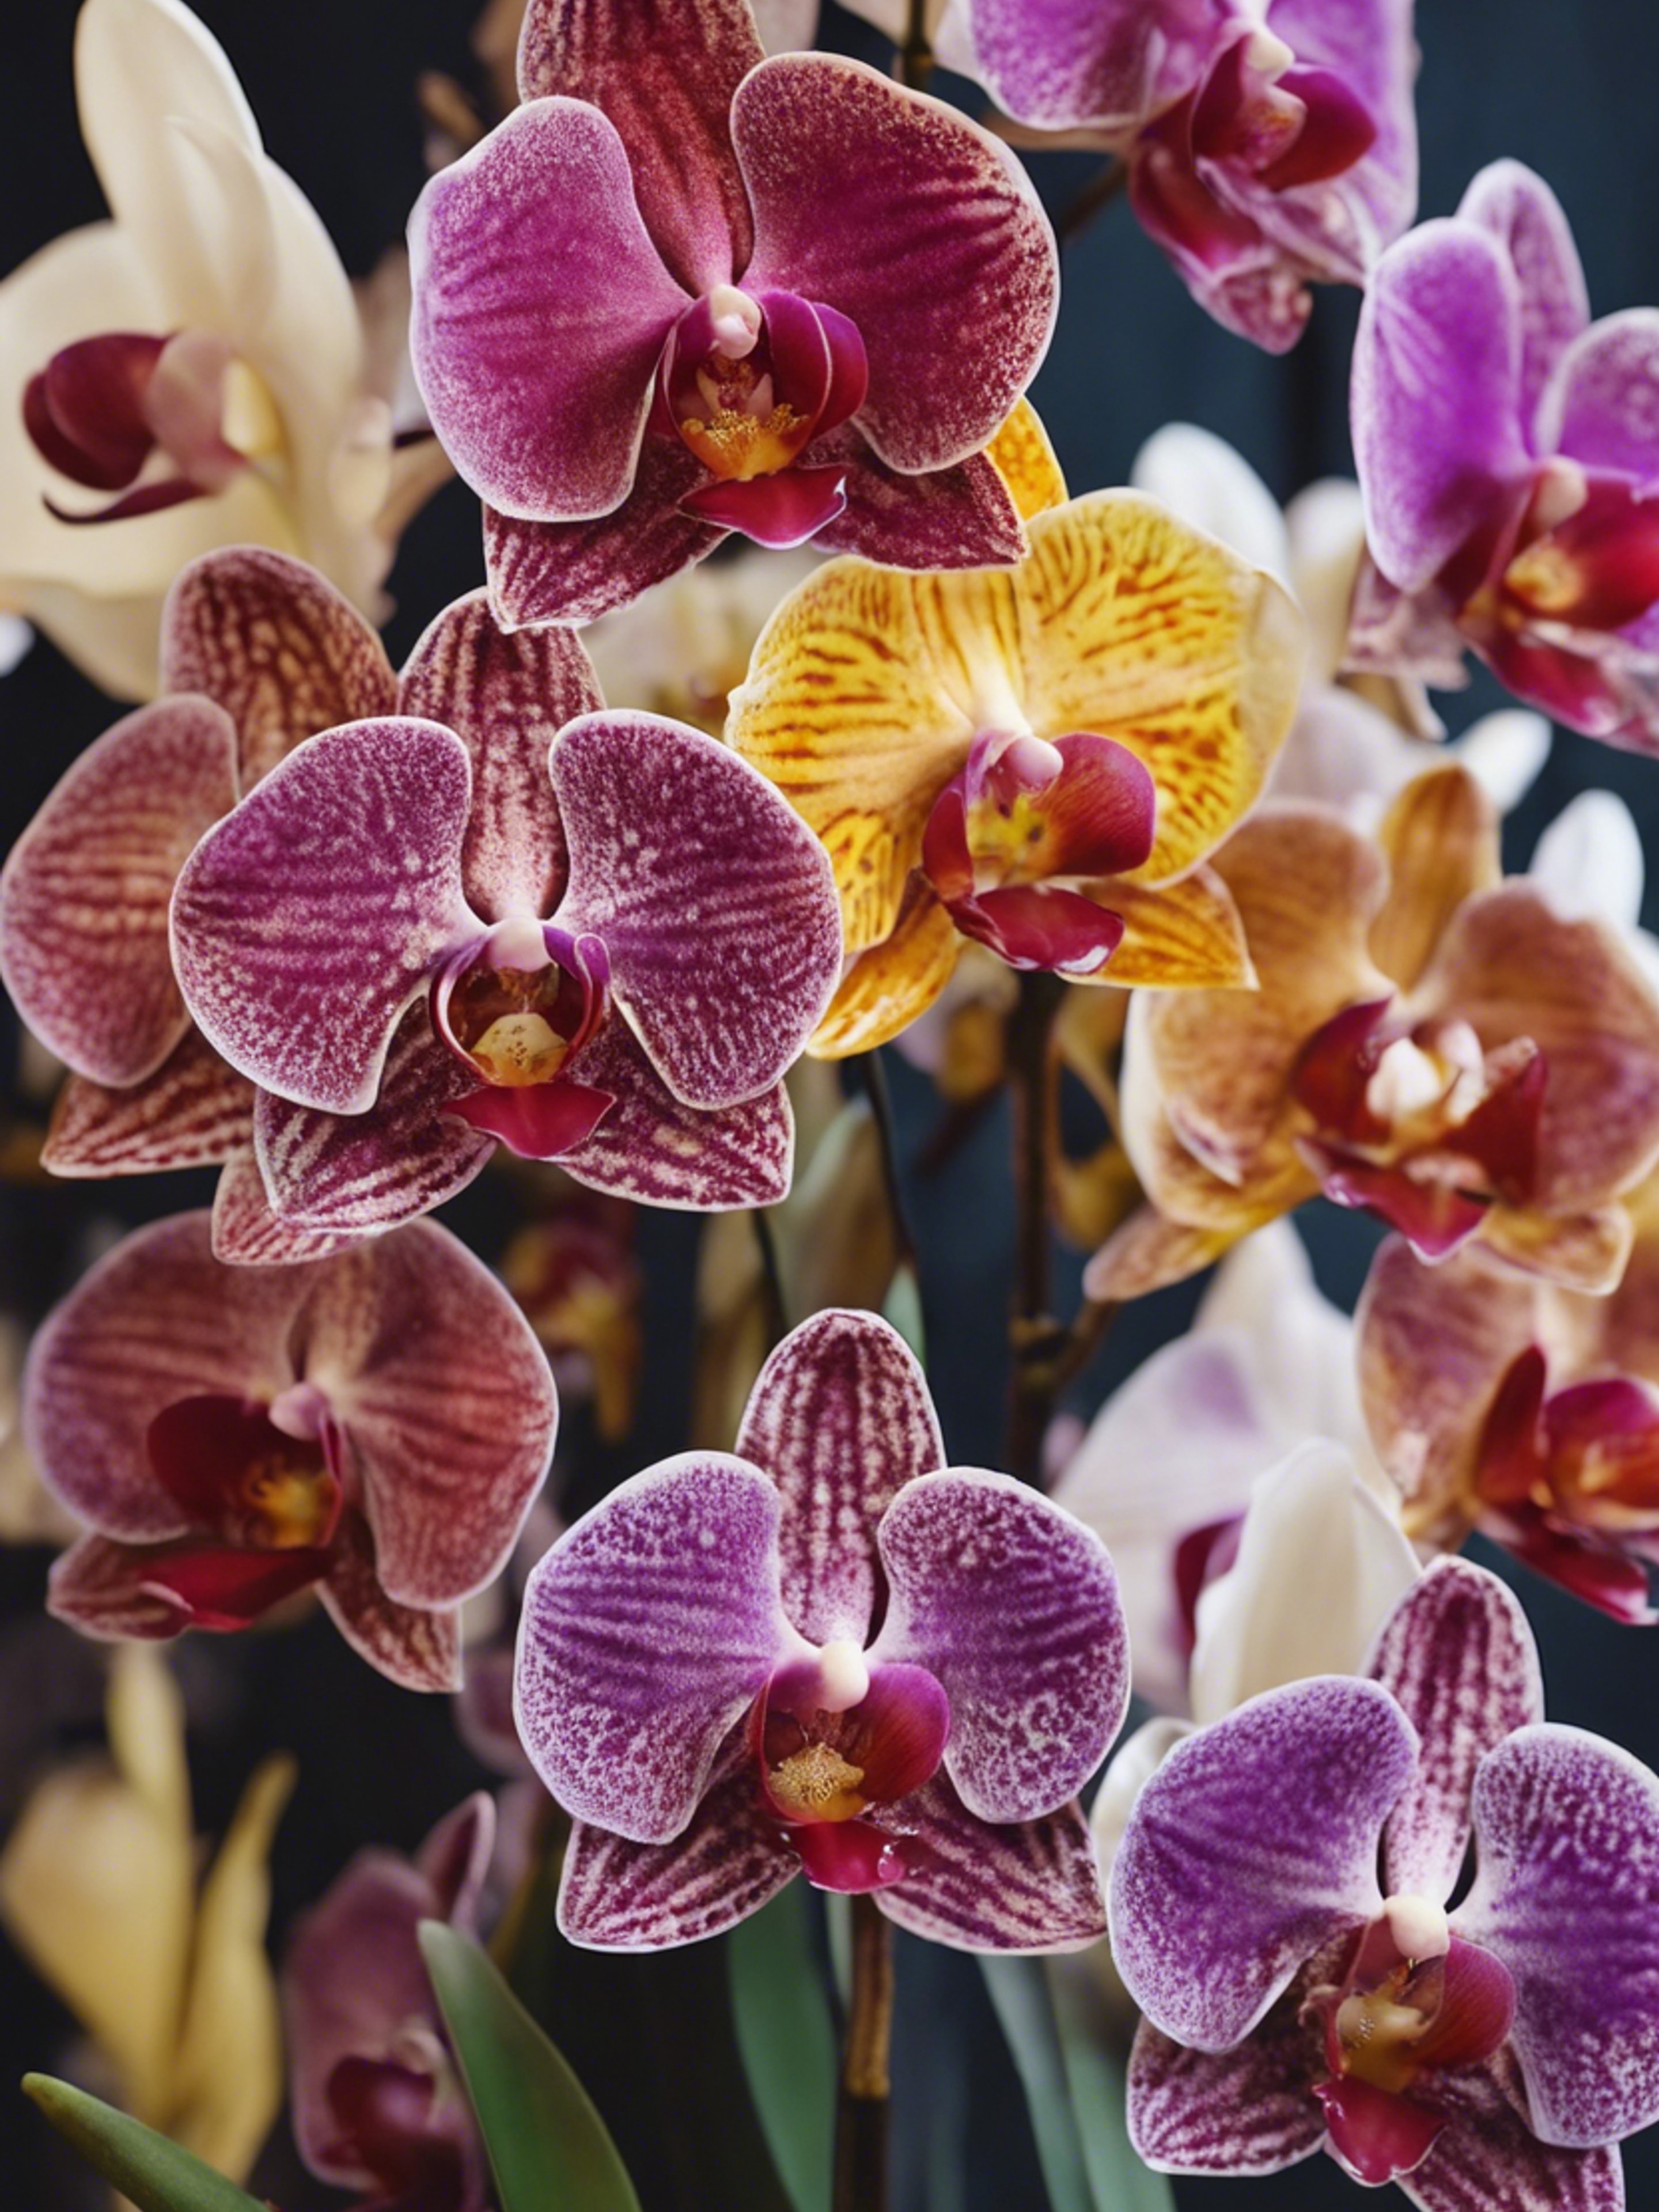 A variety of multicolored orchid species arranged in a beautiful floral arrangement壁紙[0b8f596ff3004f528a34]